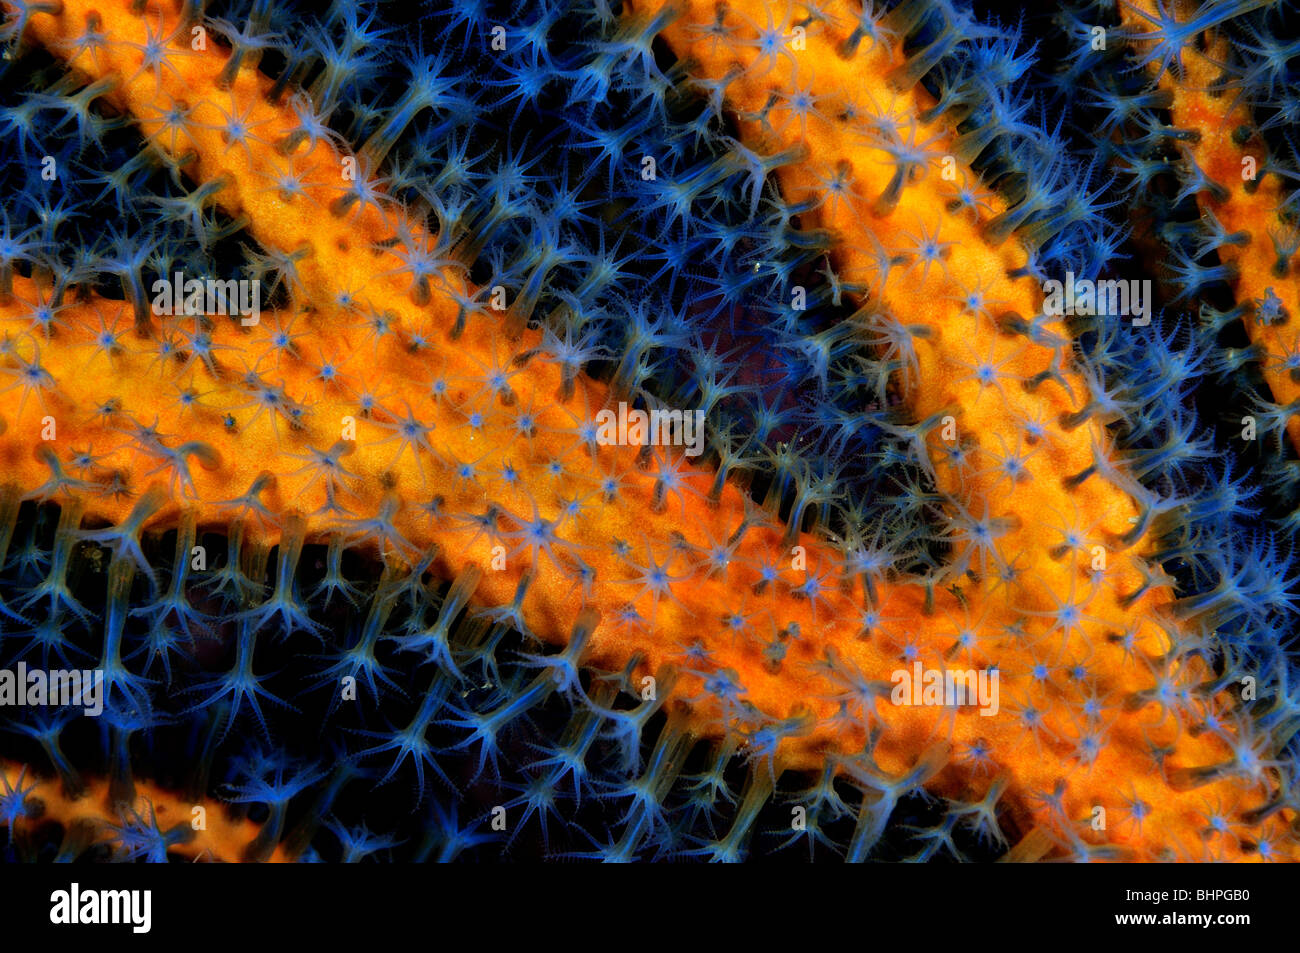 Anthogorgia sp., detail of coral with blue polyps, Bali, Indonesia, Indo-Pacific Ocean Stock Photo